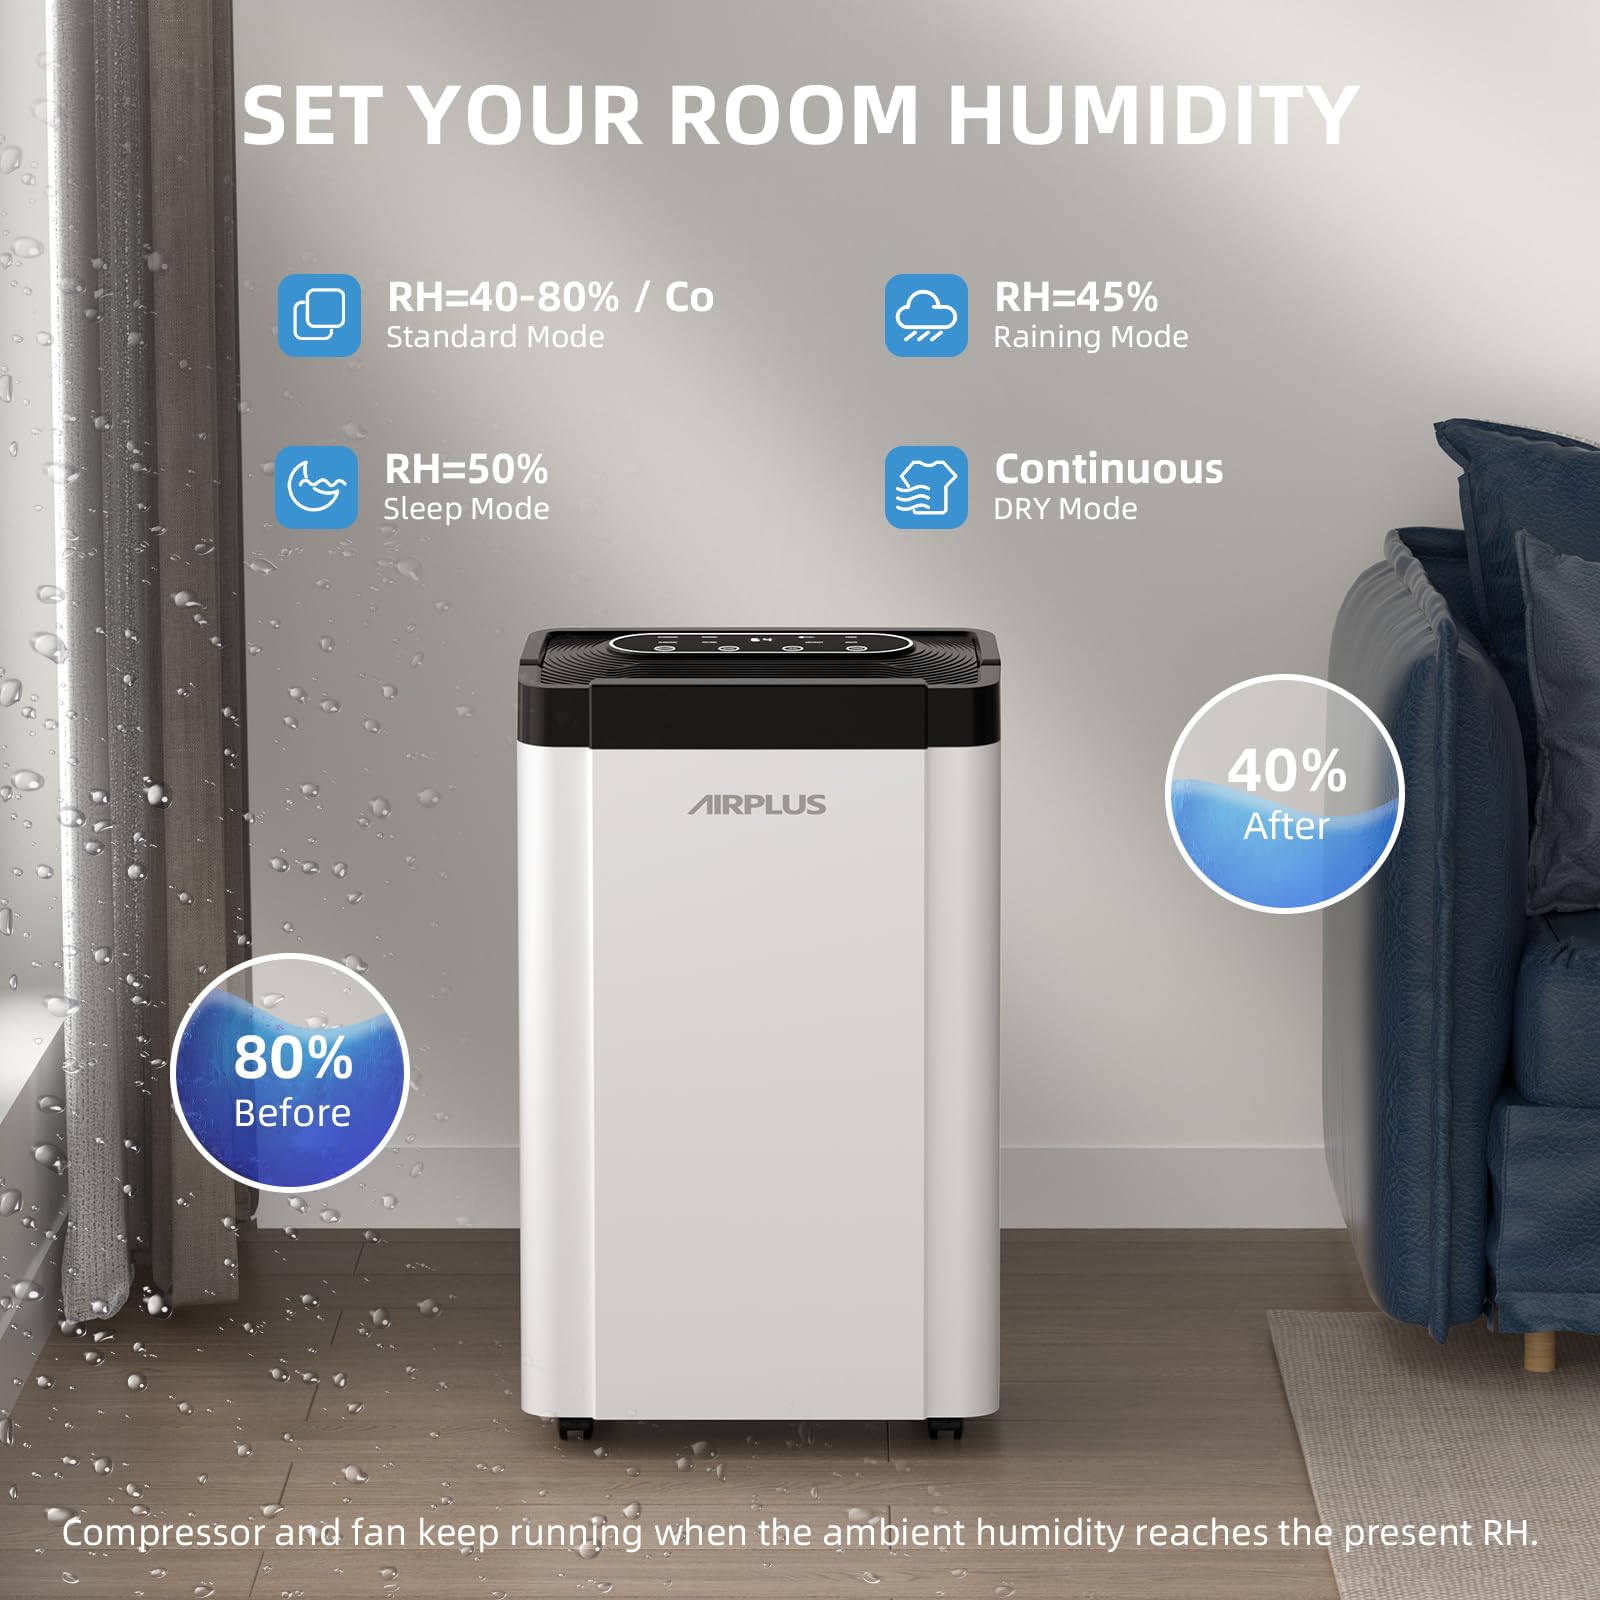 70 Pints Dehumidifier for Home and Basement, 4,500 Sq. Ft. Dehumidifiers with Auto Drain or Manual Drainage, 0.8 gal Water Tank Capacity, Auto Shut off for Room, Bedroom, Bathroom